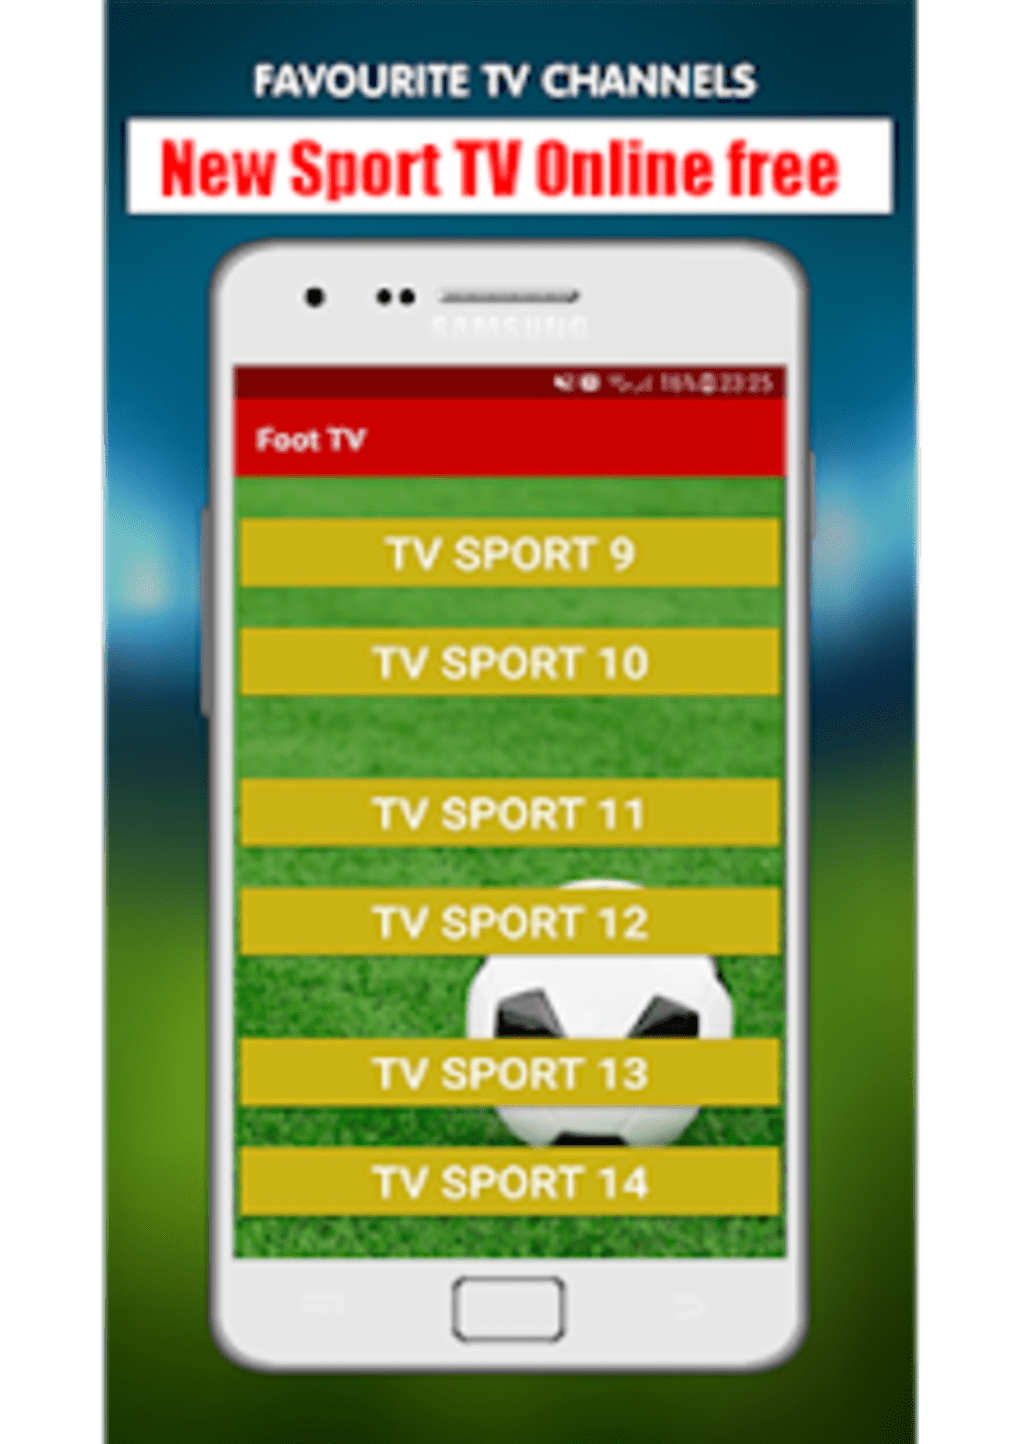 live sports tv app for android free